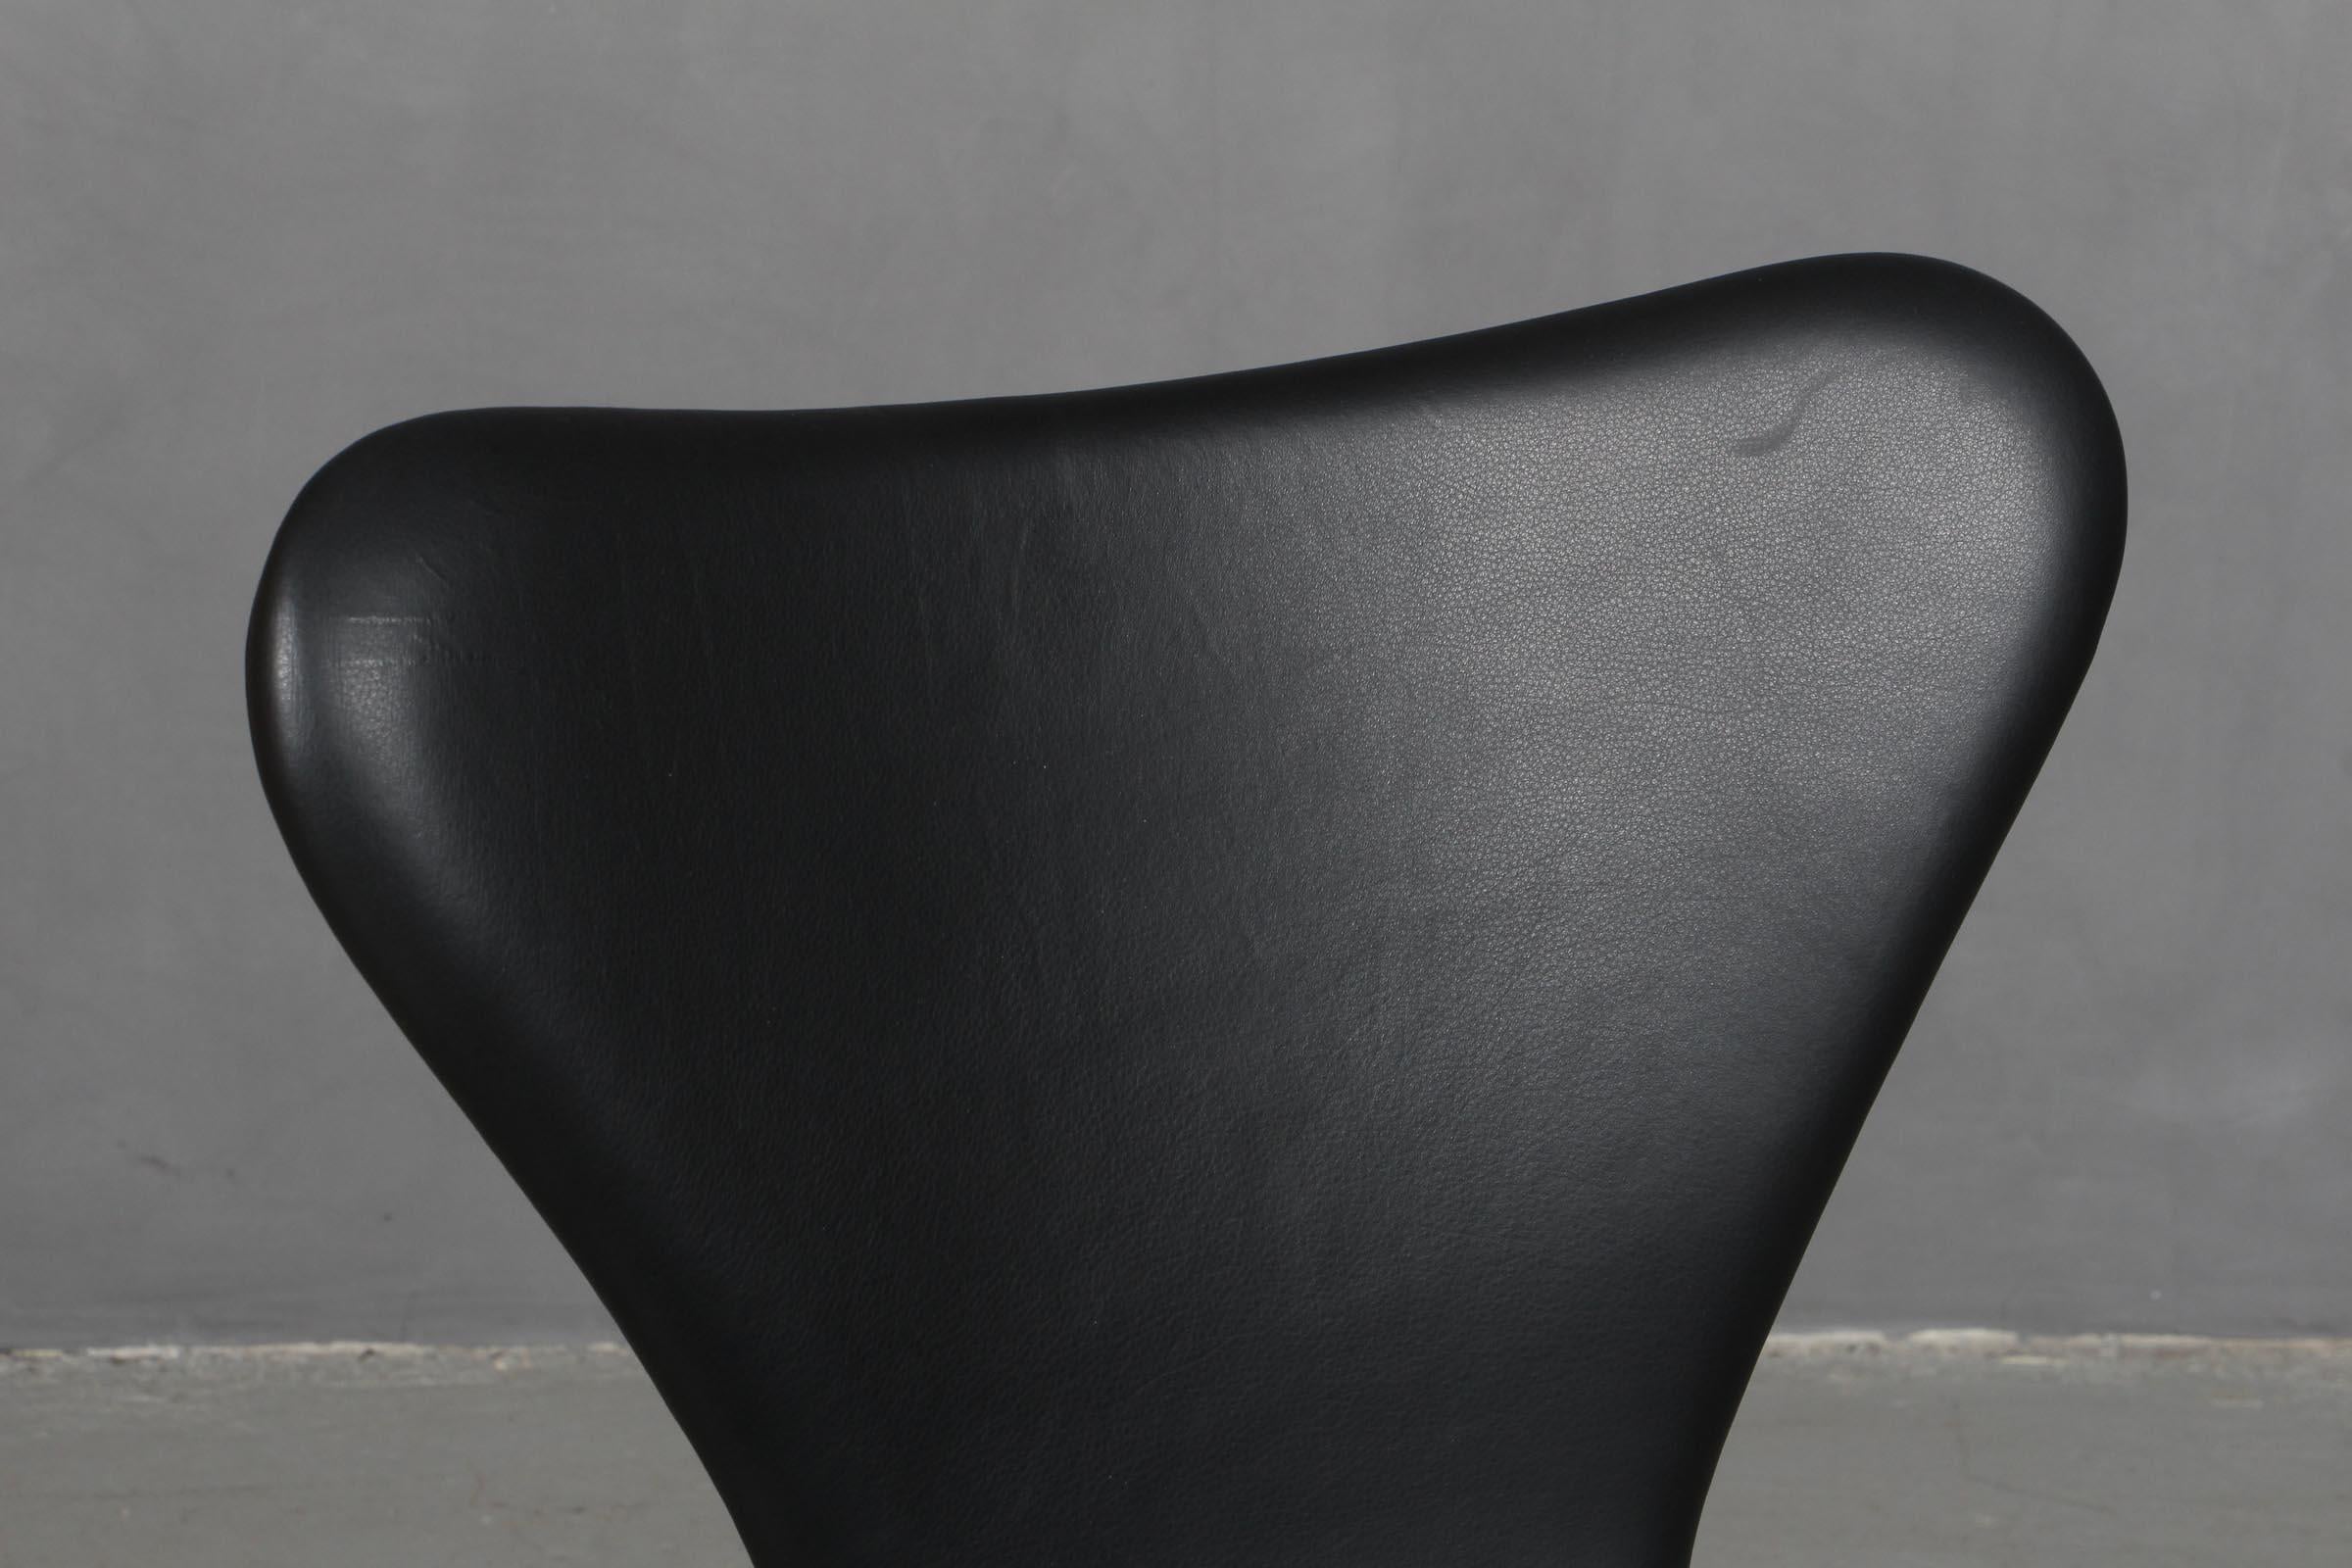 Arne Jacobsen dining chair new upholstered with black aniline leather.

Base of powder coated steel tube.

Model 3107 Syveren, made by Fritz Hansen.